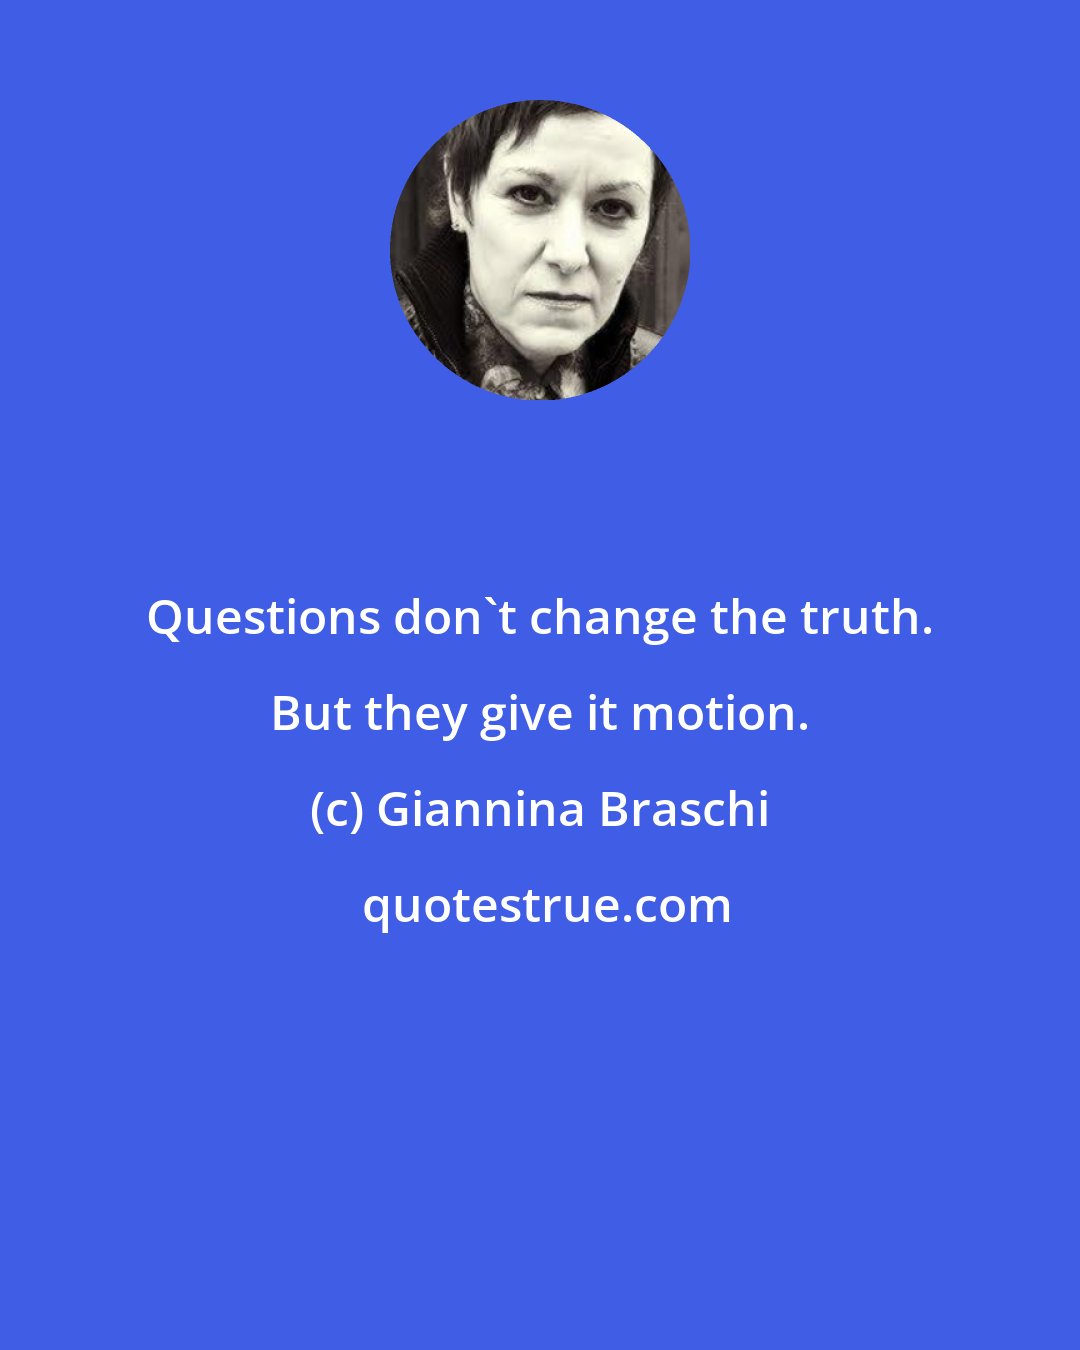 Giannina Braschi: Questions don't change the truth. But they give it motion.